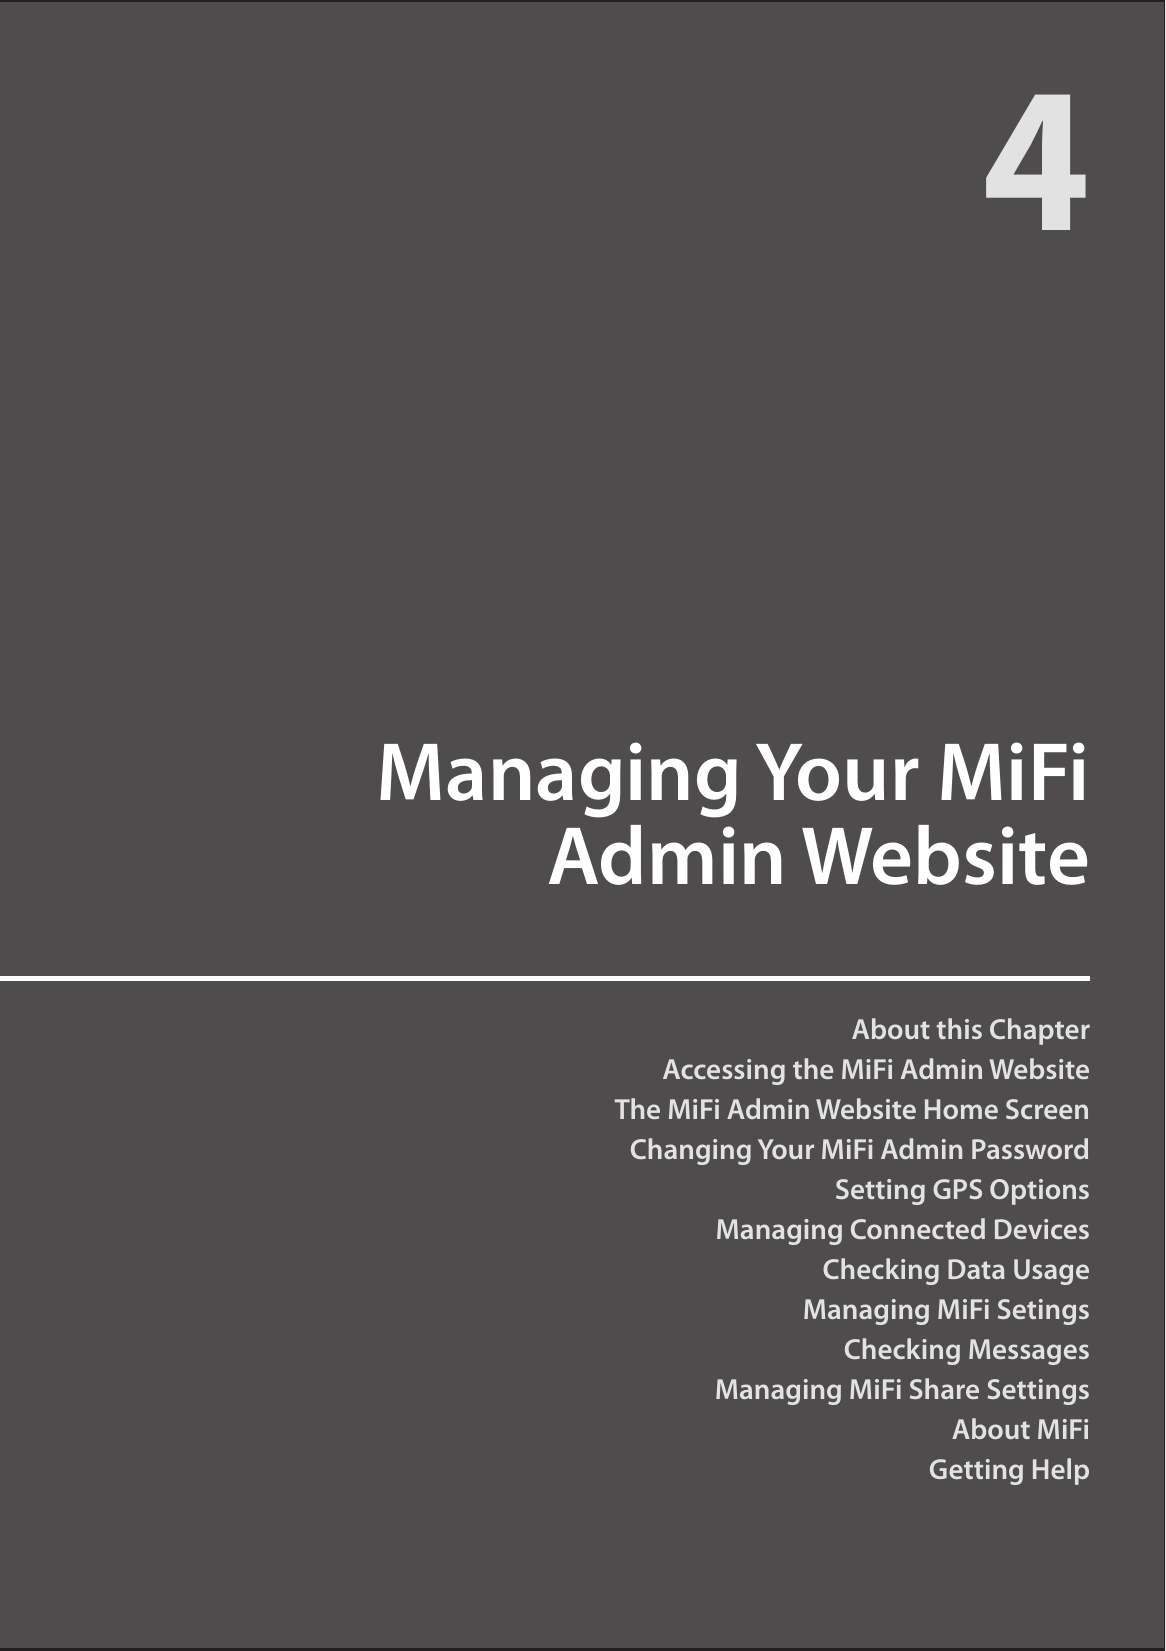 About this ChapterAccessing the MiFi Admin WebsiteThe MiFi Admin Website Home ScreenChanging Your MiFi Admin PasswordSetting GPS OptionsManaging Connected DevicesChecking Data UsageManaging MiFi SetingsChecking MessagesManaging MiFi Share SettingsAbout MiFiGetting HelpManaging Your MiFi  Admin Website4